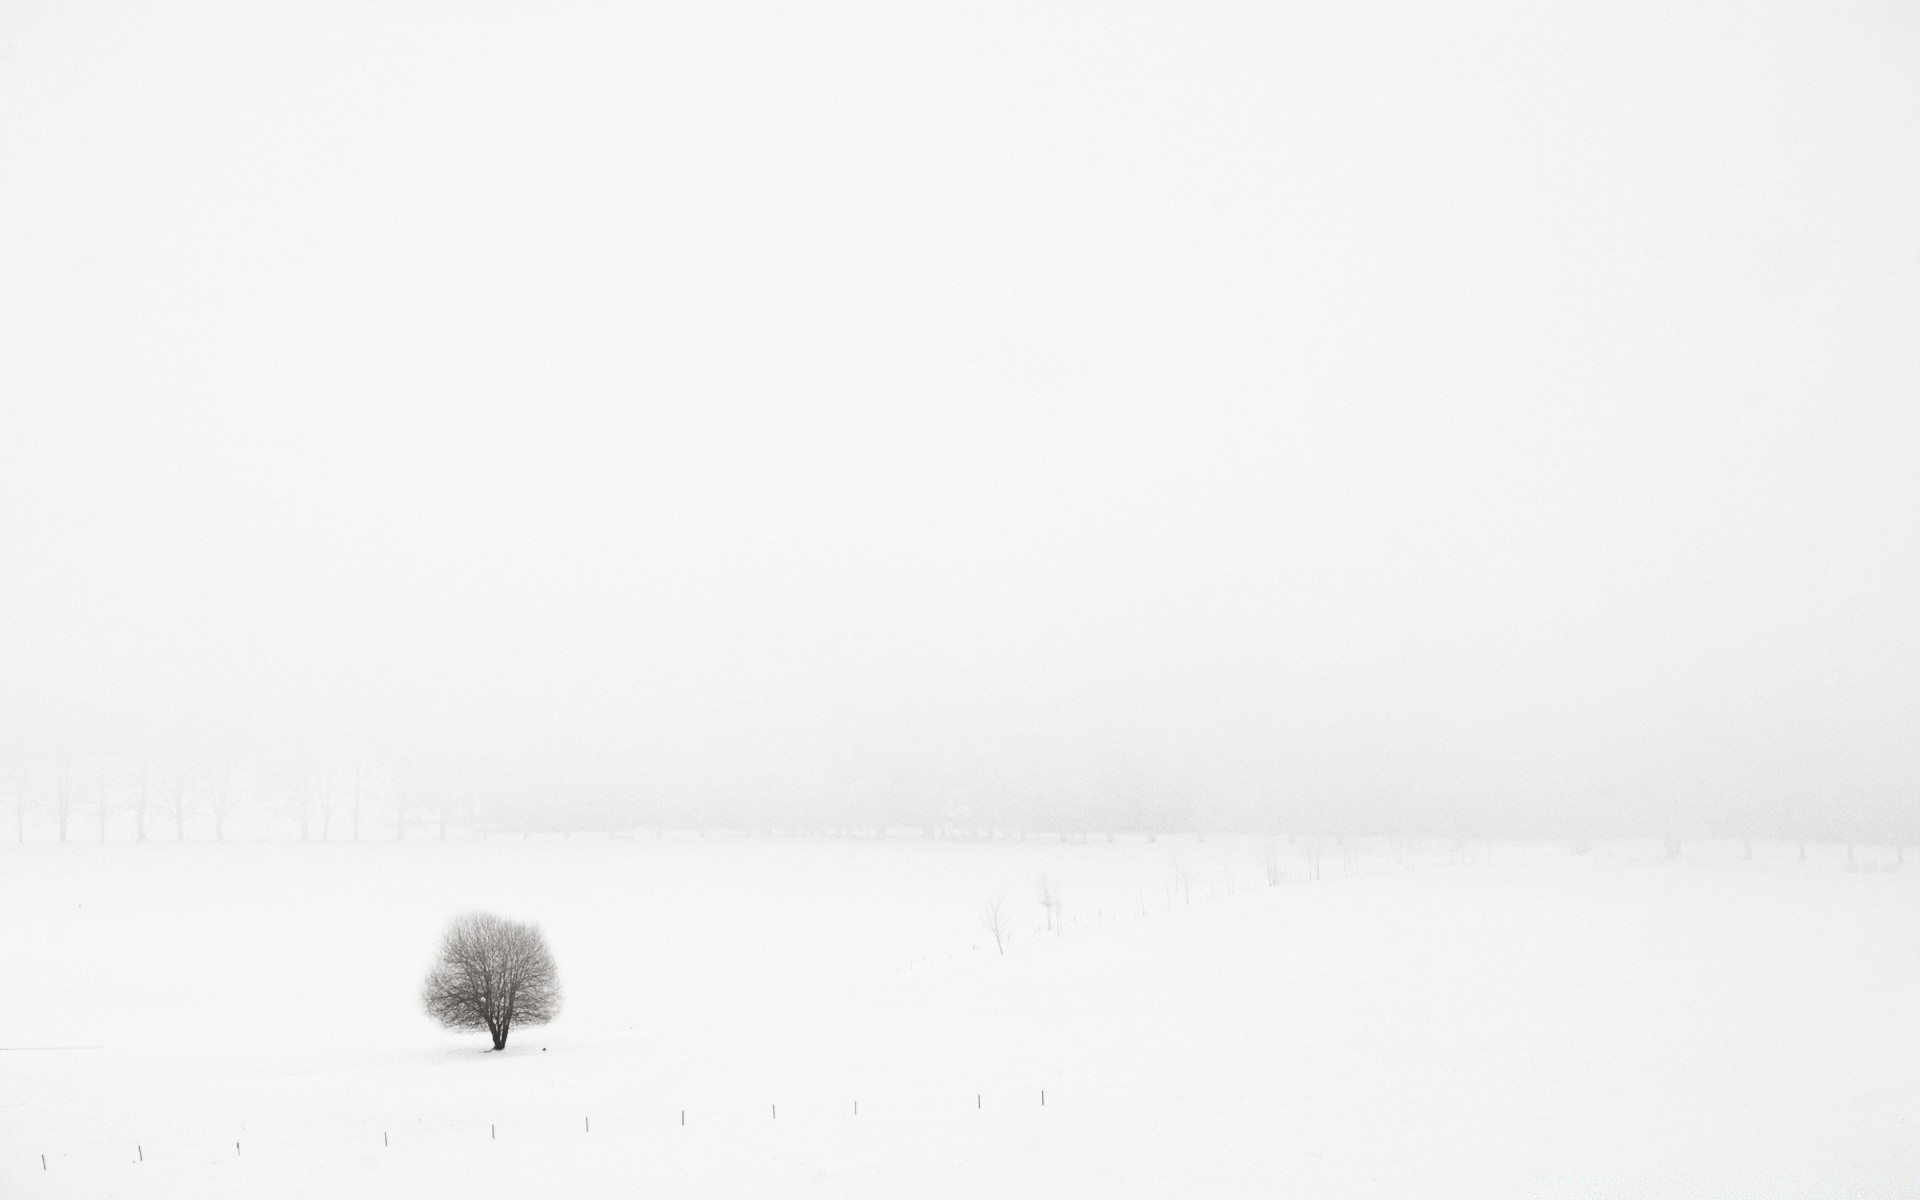 Lonely Tree In Snow Field Wallpapers